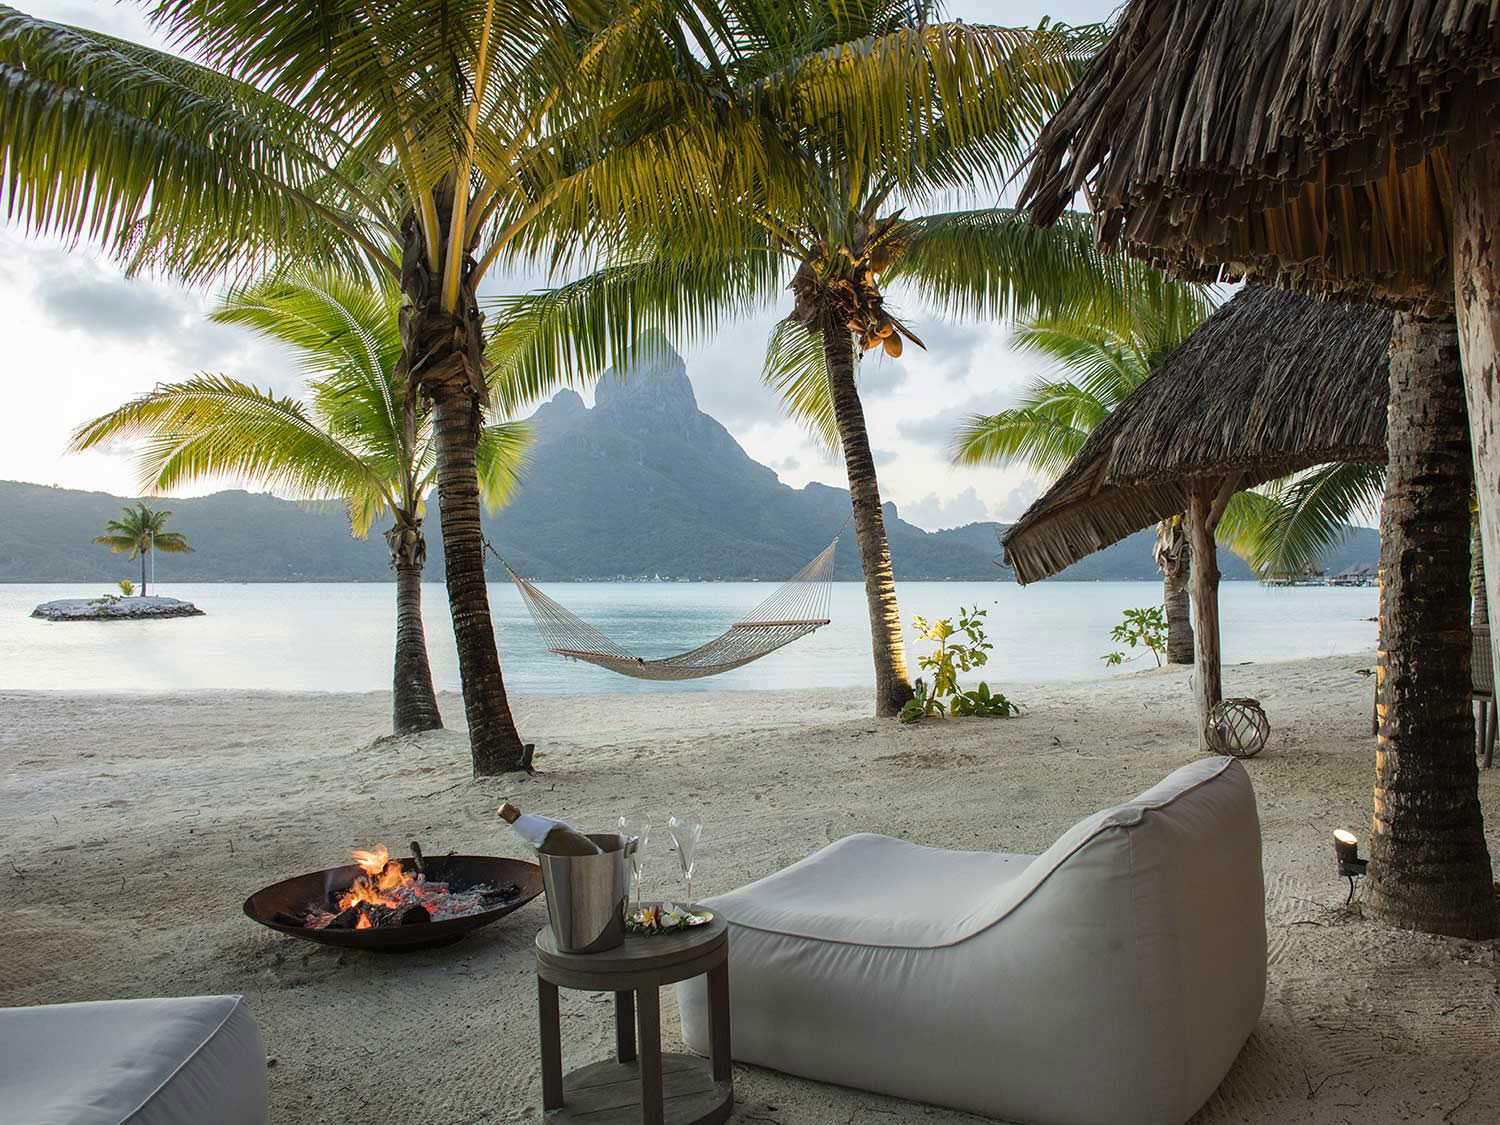 Palm trees, lounge furniture, and a hammock on the beach of Bora Bora. The ocean and a mountainous island is in the distance.